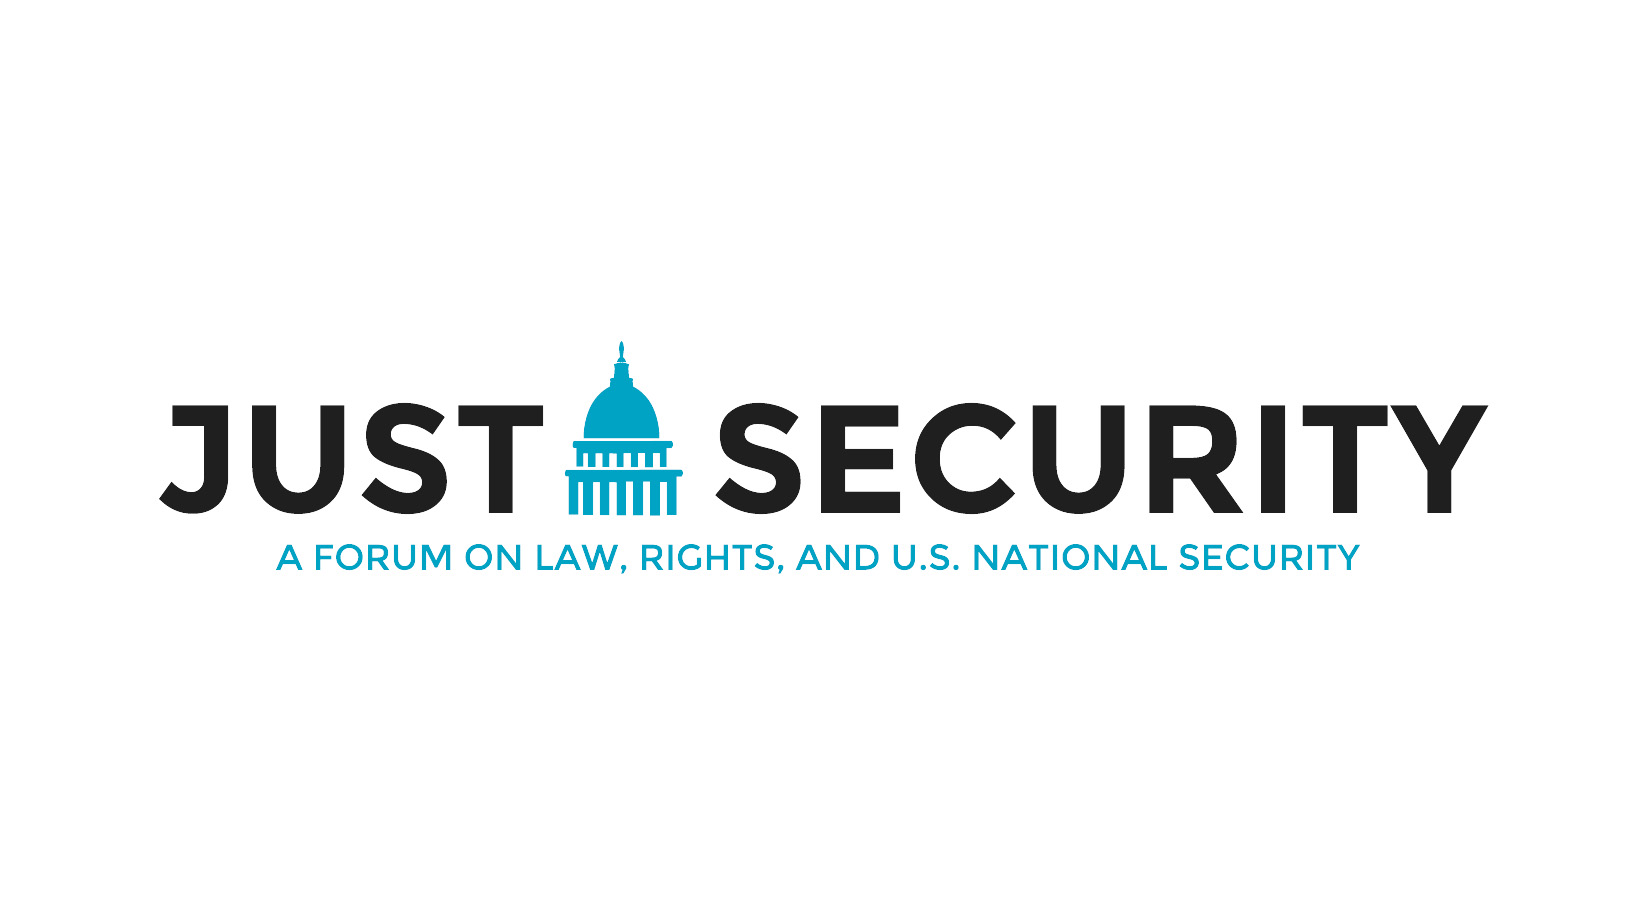 Just Security Logo